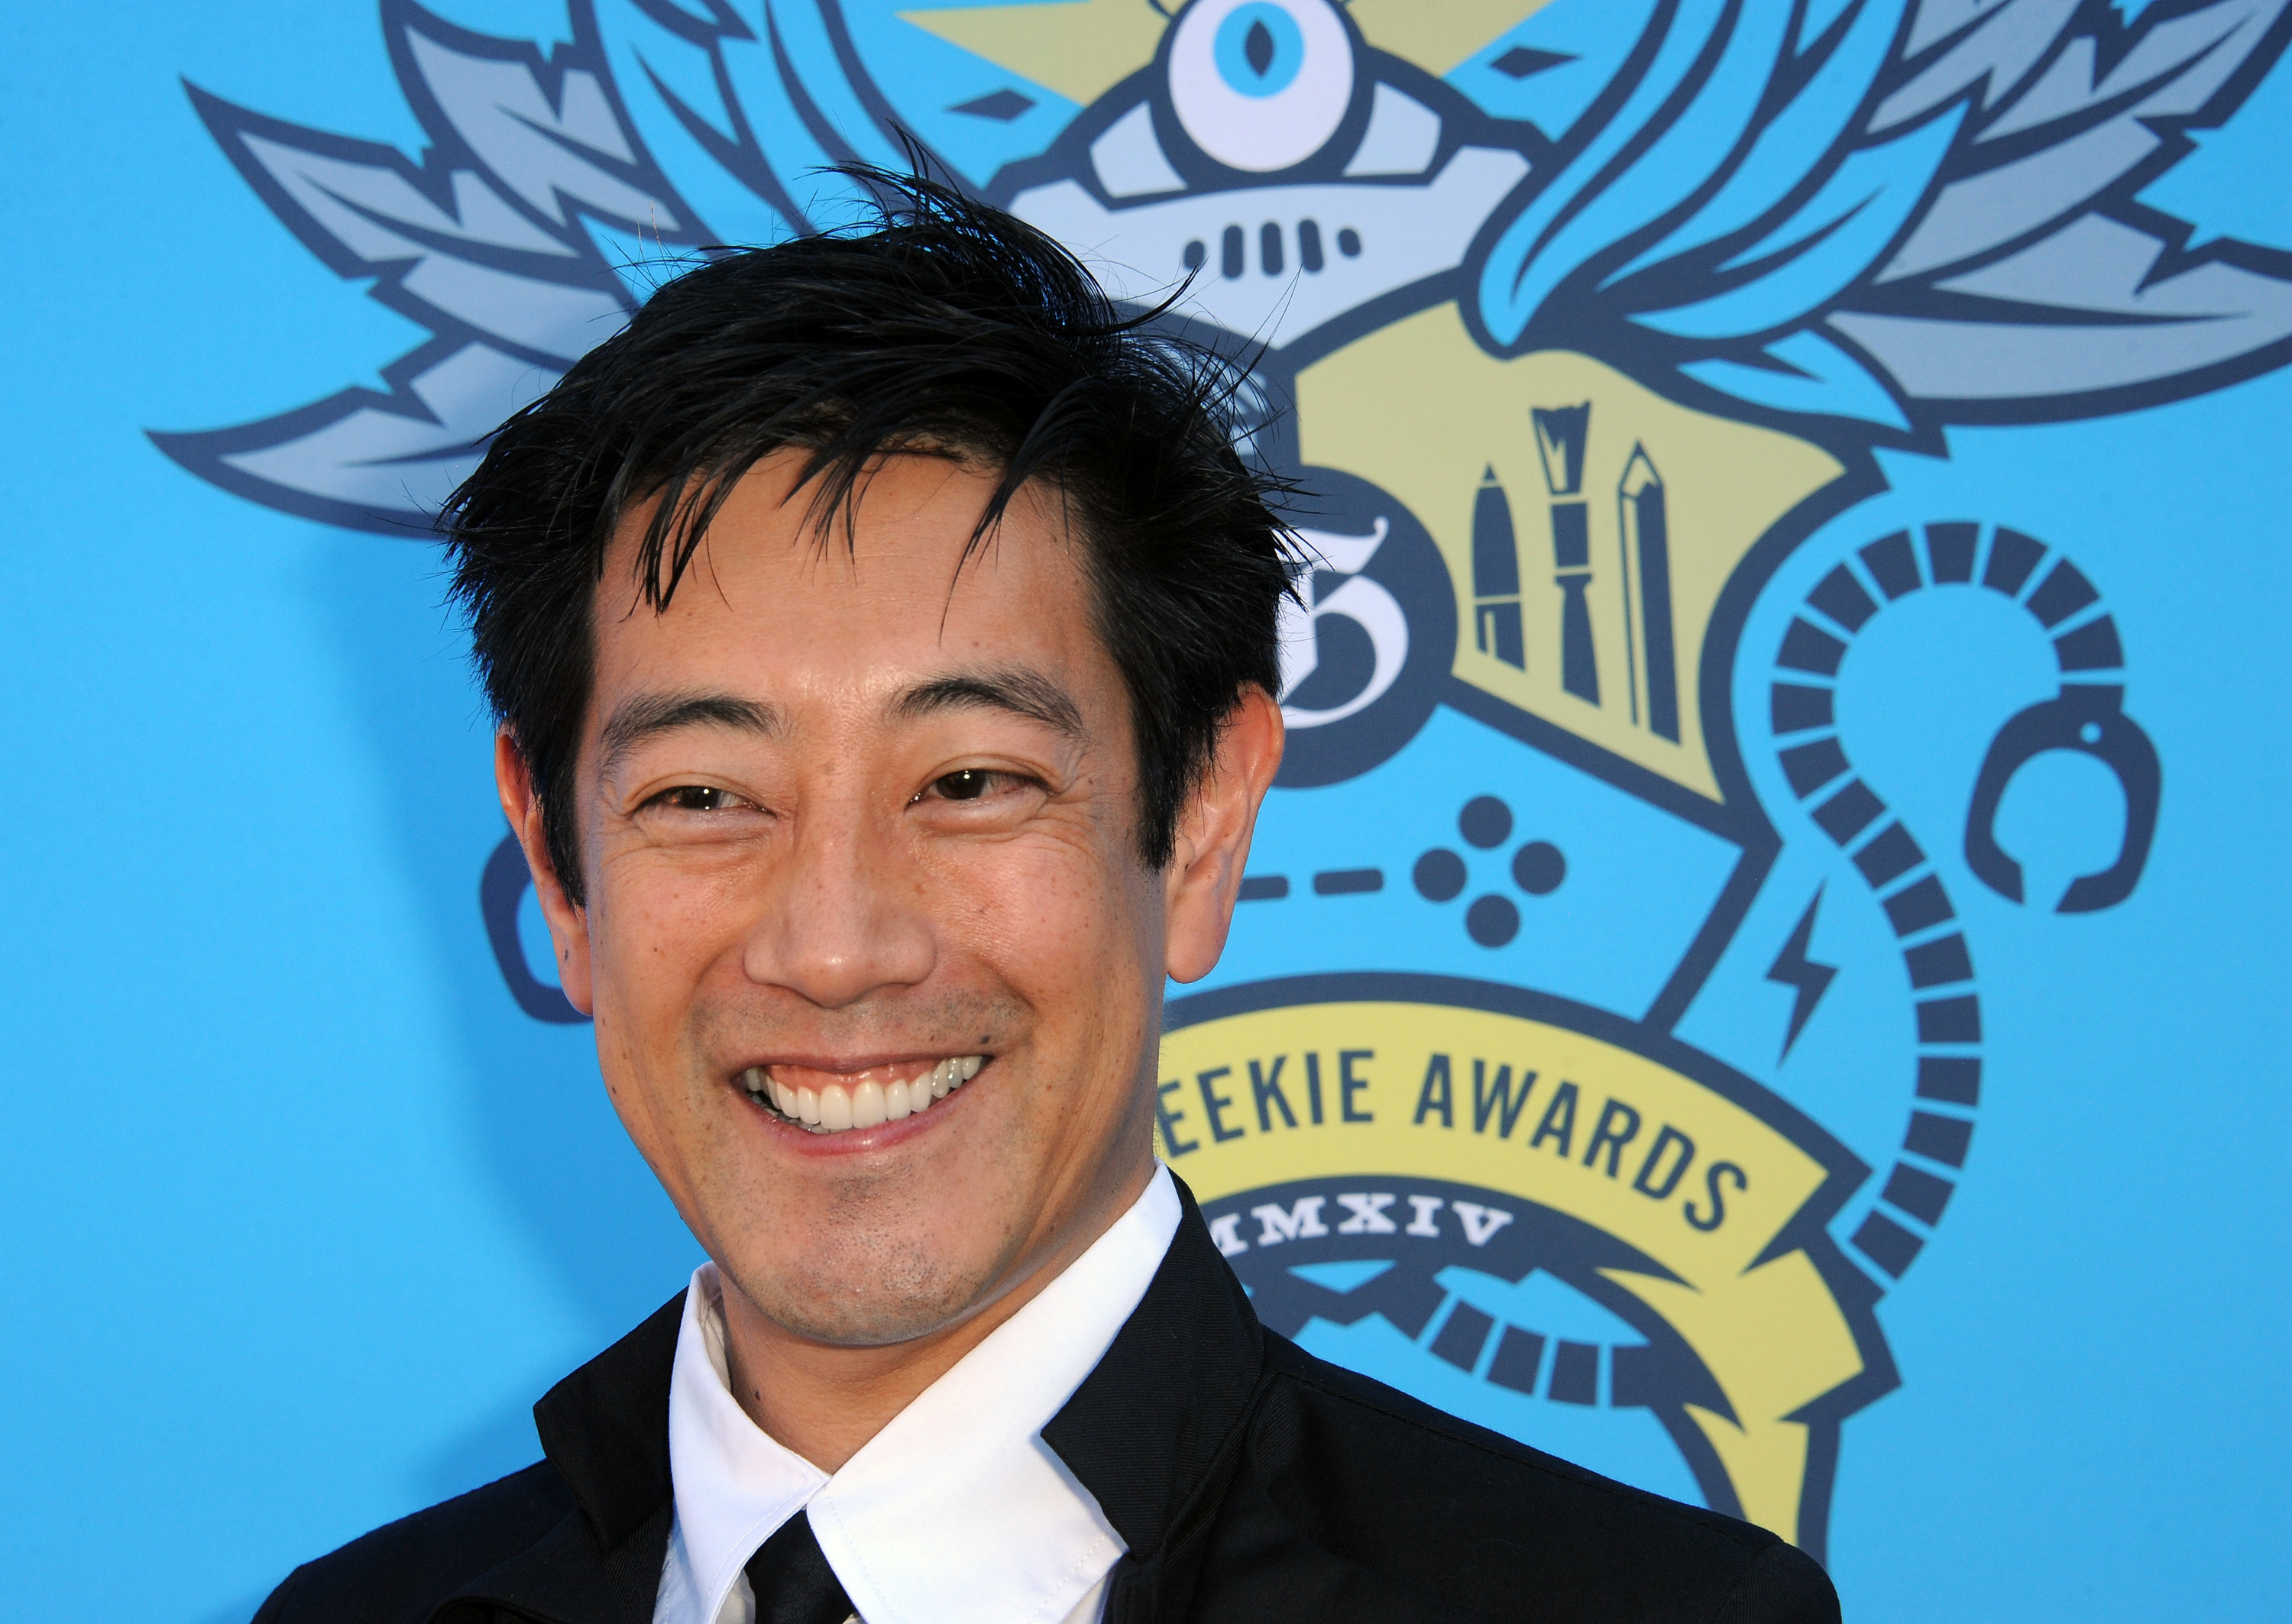 Grant Imahara smiles widely wearing a suit.